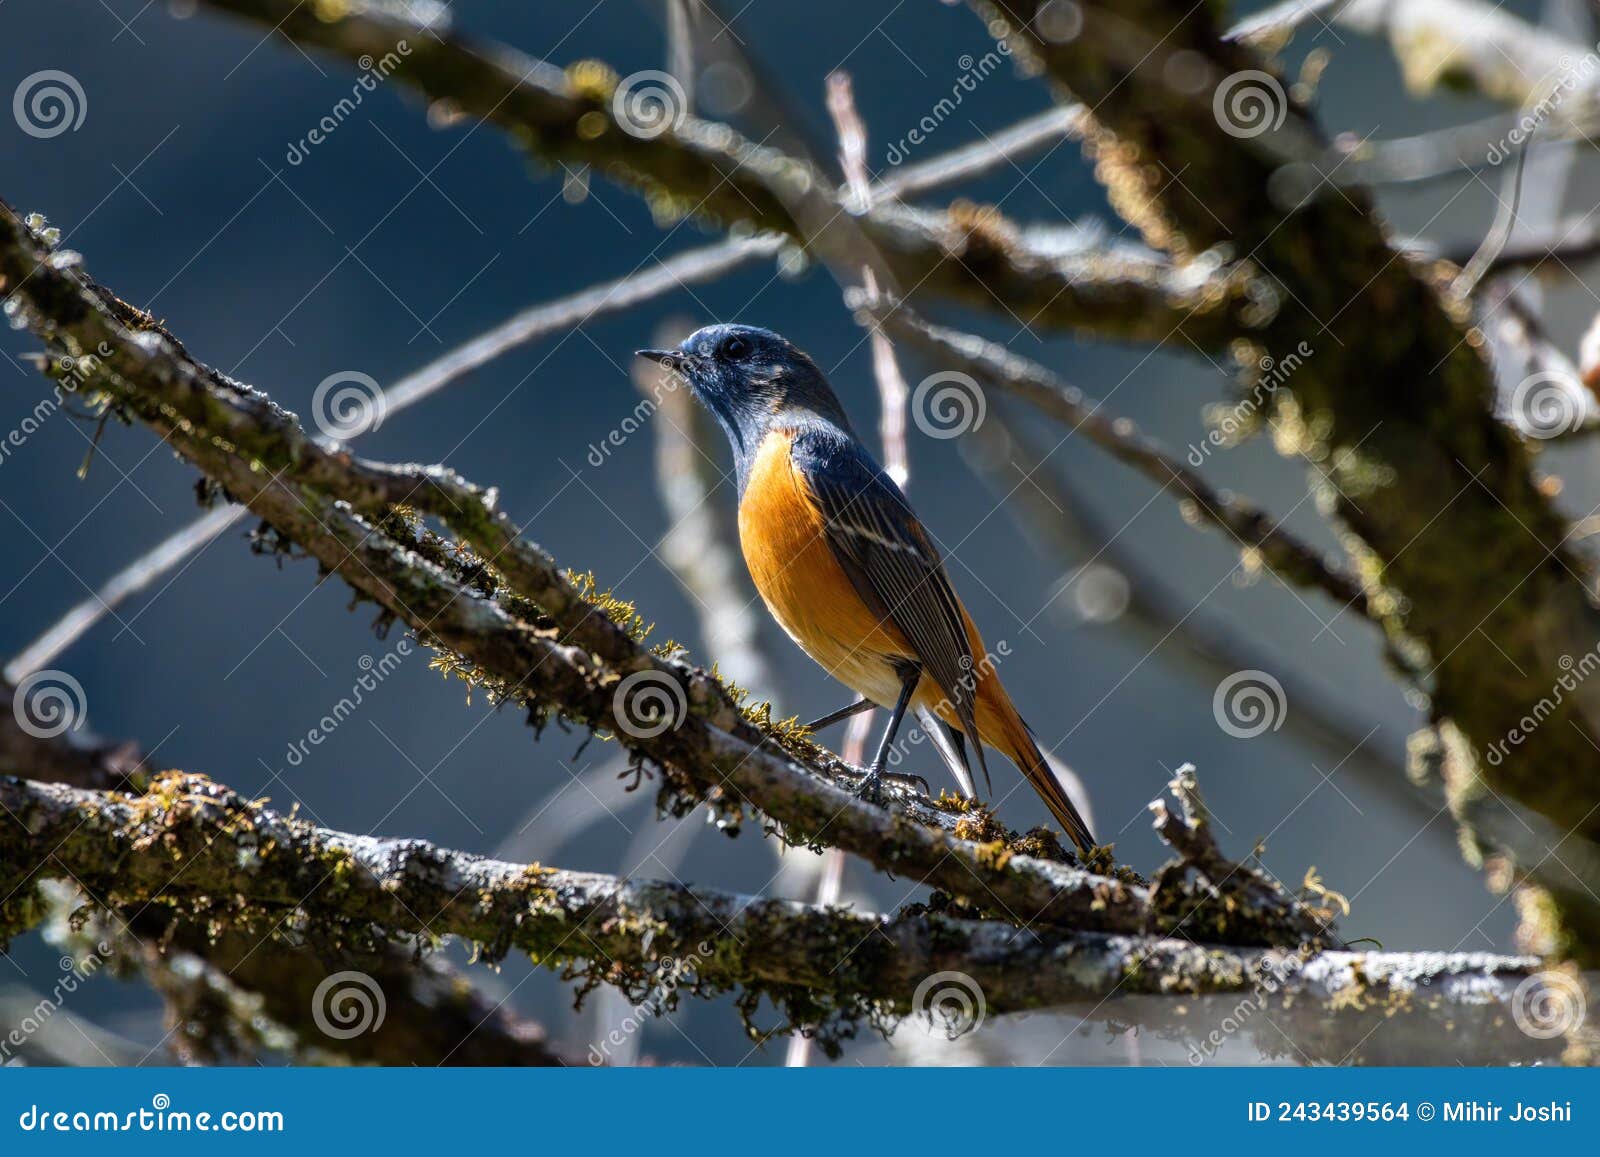 132 Sikkim Animals Stock Photos - Free & Royalty-Free Stock Photos from  Dreamstime